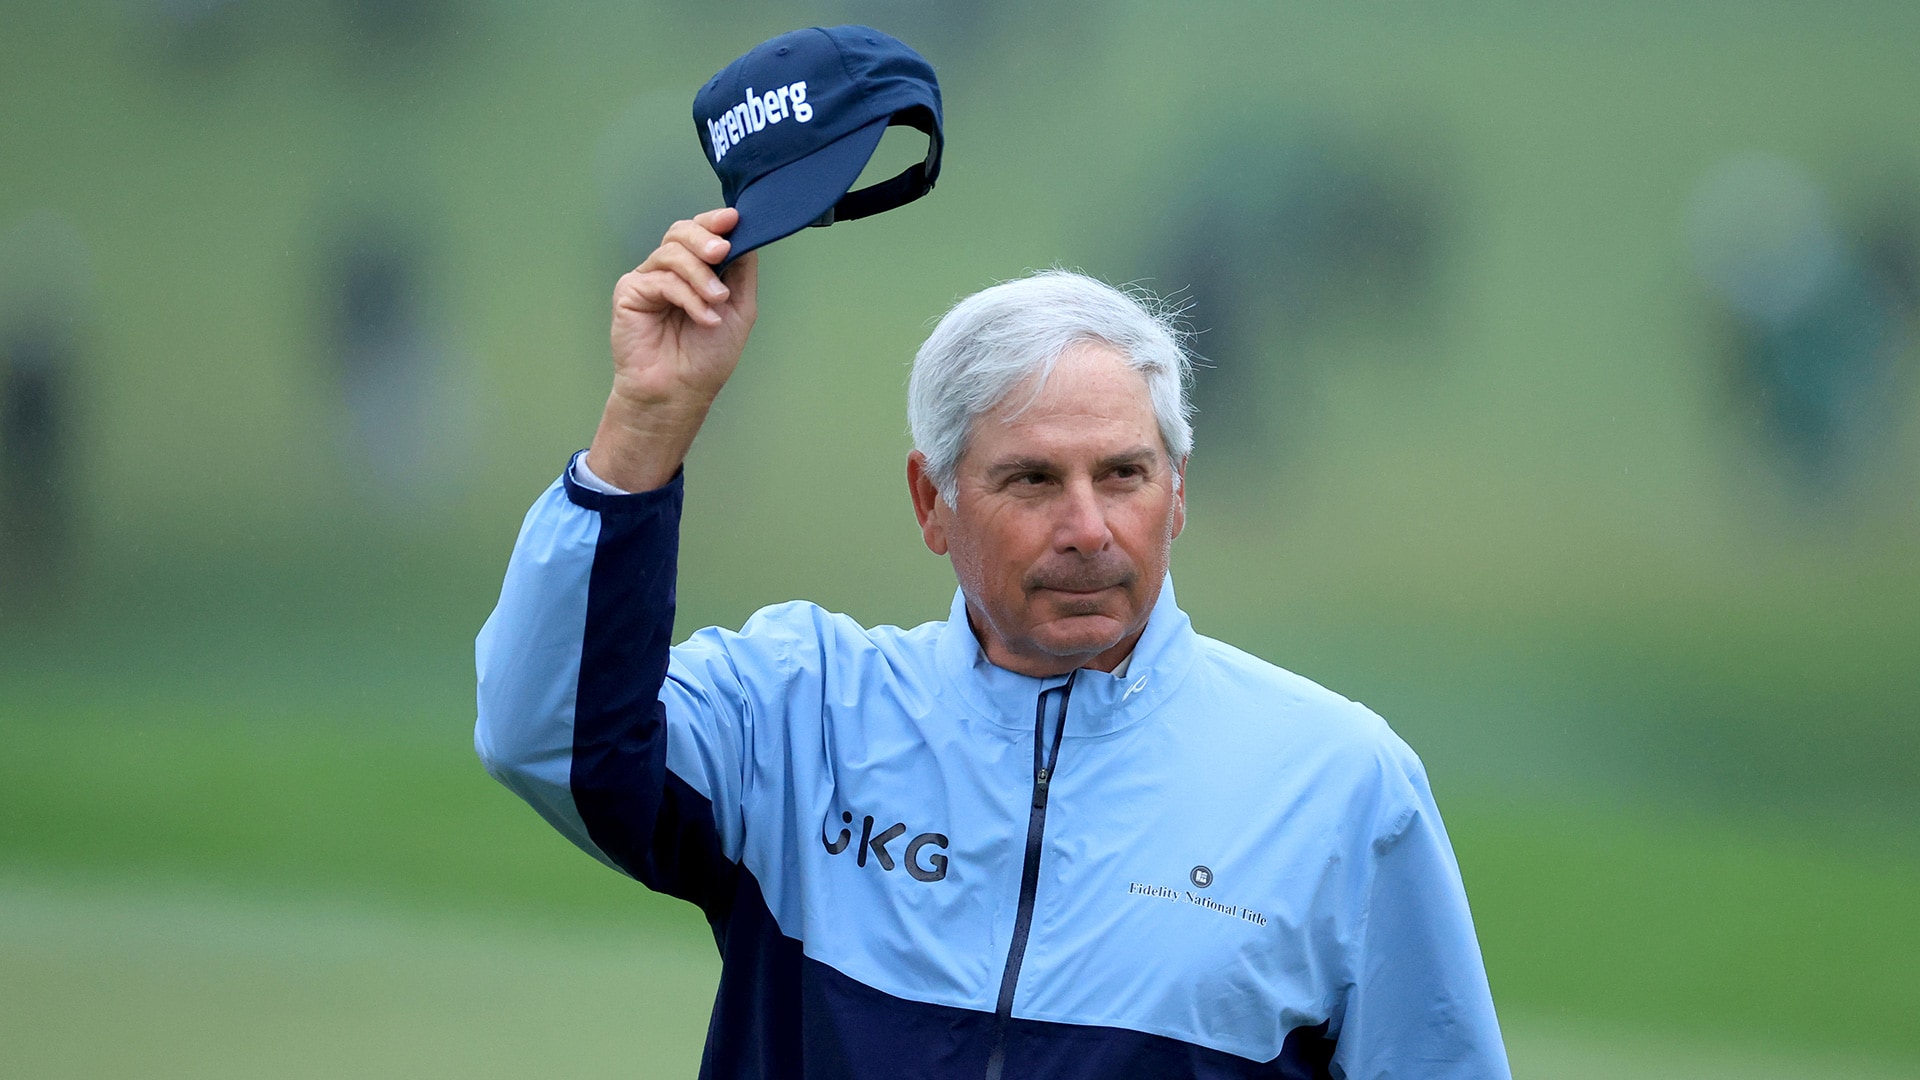 2023 Masters: Fred Couples, 63, makes Masters history as oldest player to make cut